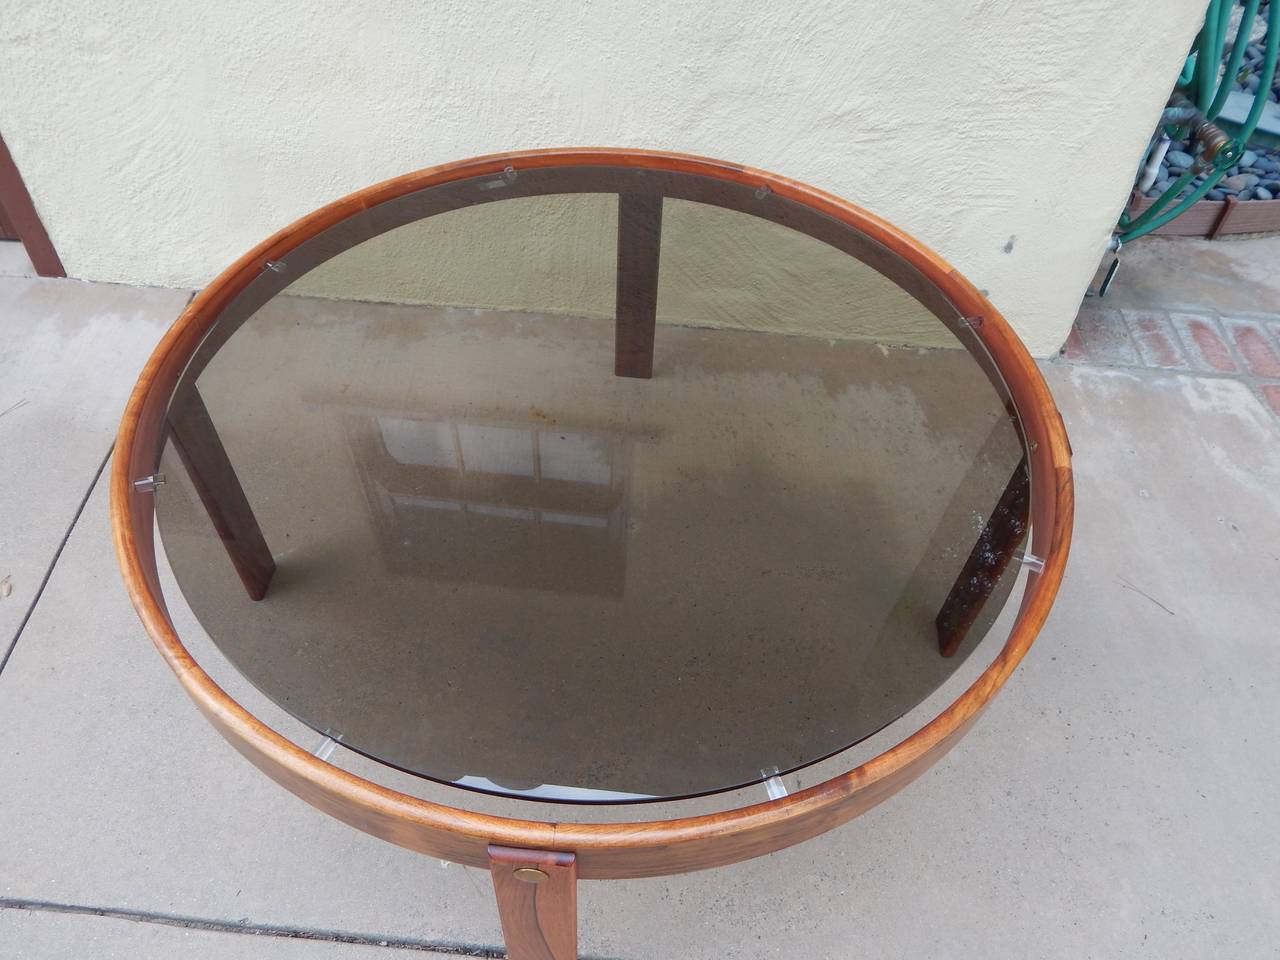 Danish rosewood coffee table with smoked glass top.
Original glass top is floated on Lucite pegs. There are brass fittings which hold each rosewood leg in place. Made in Denmark, circa 1970.